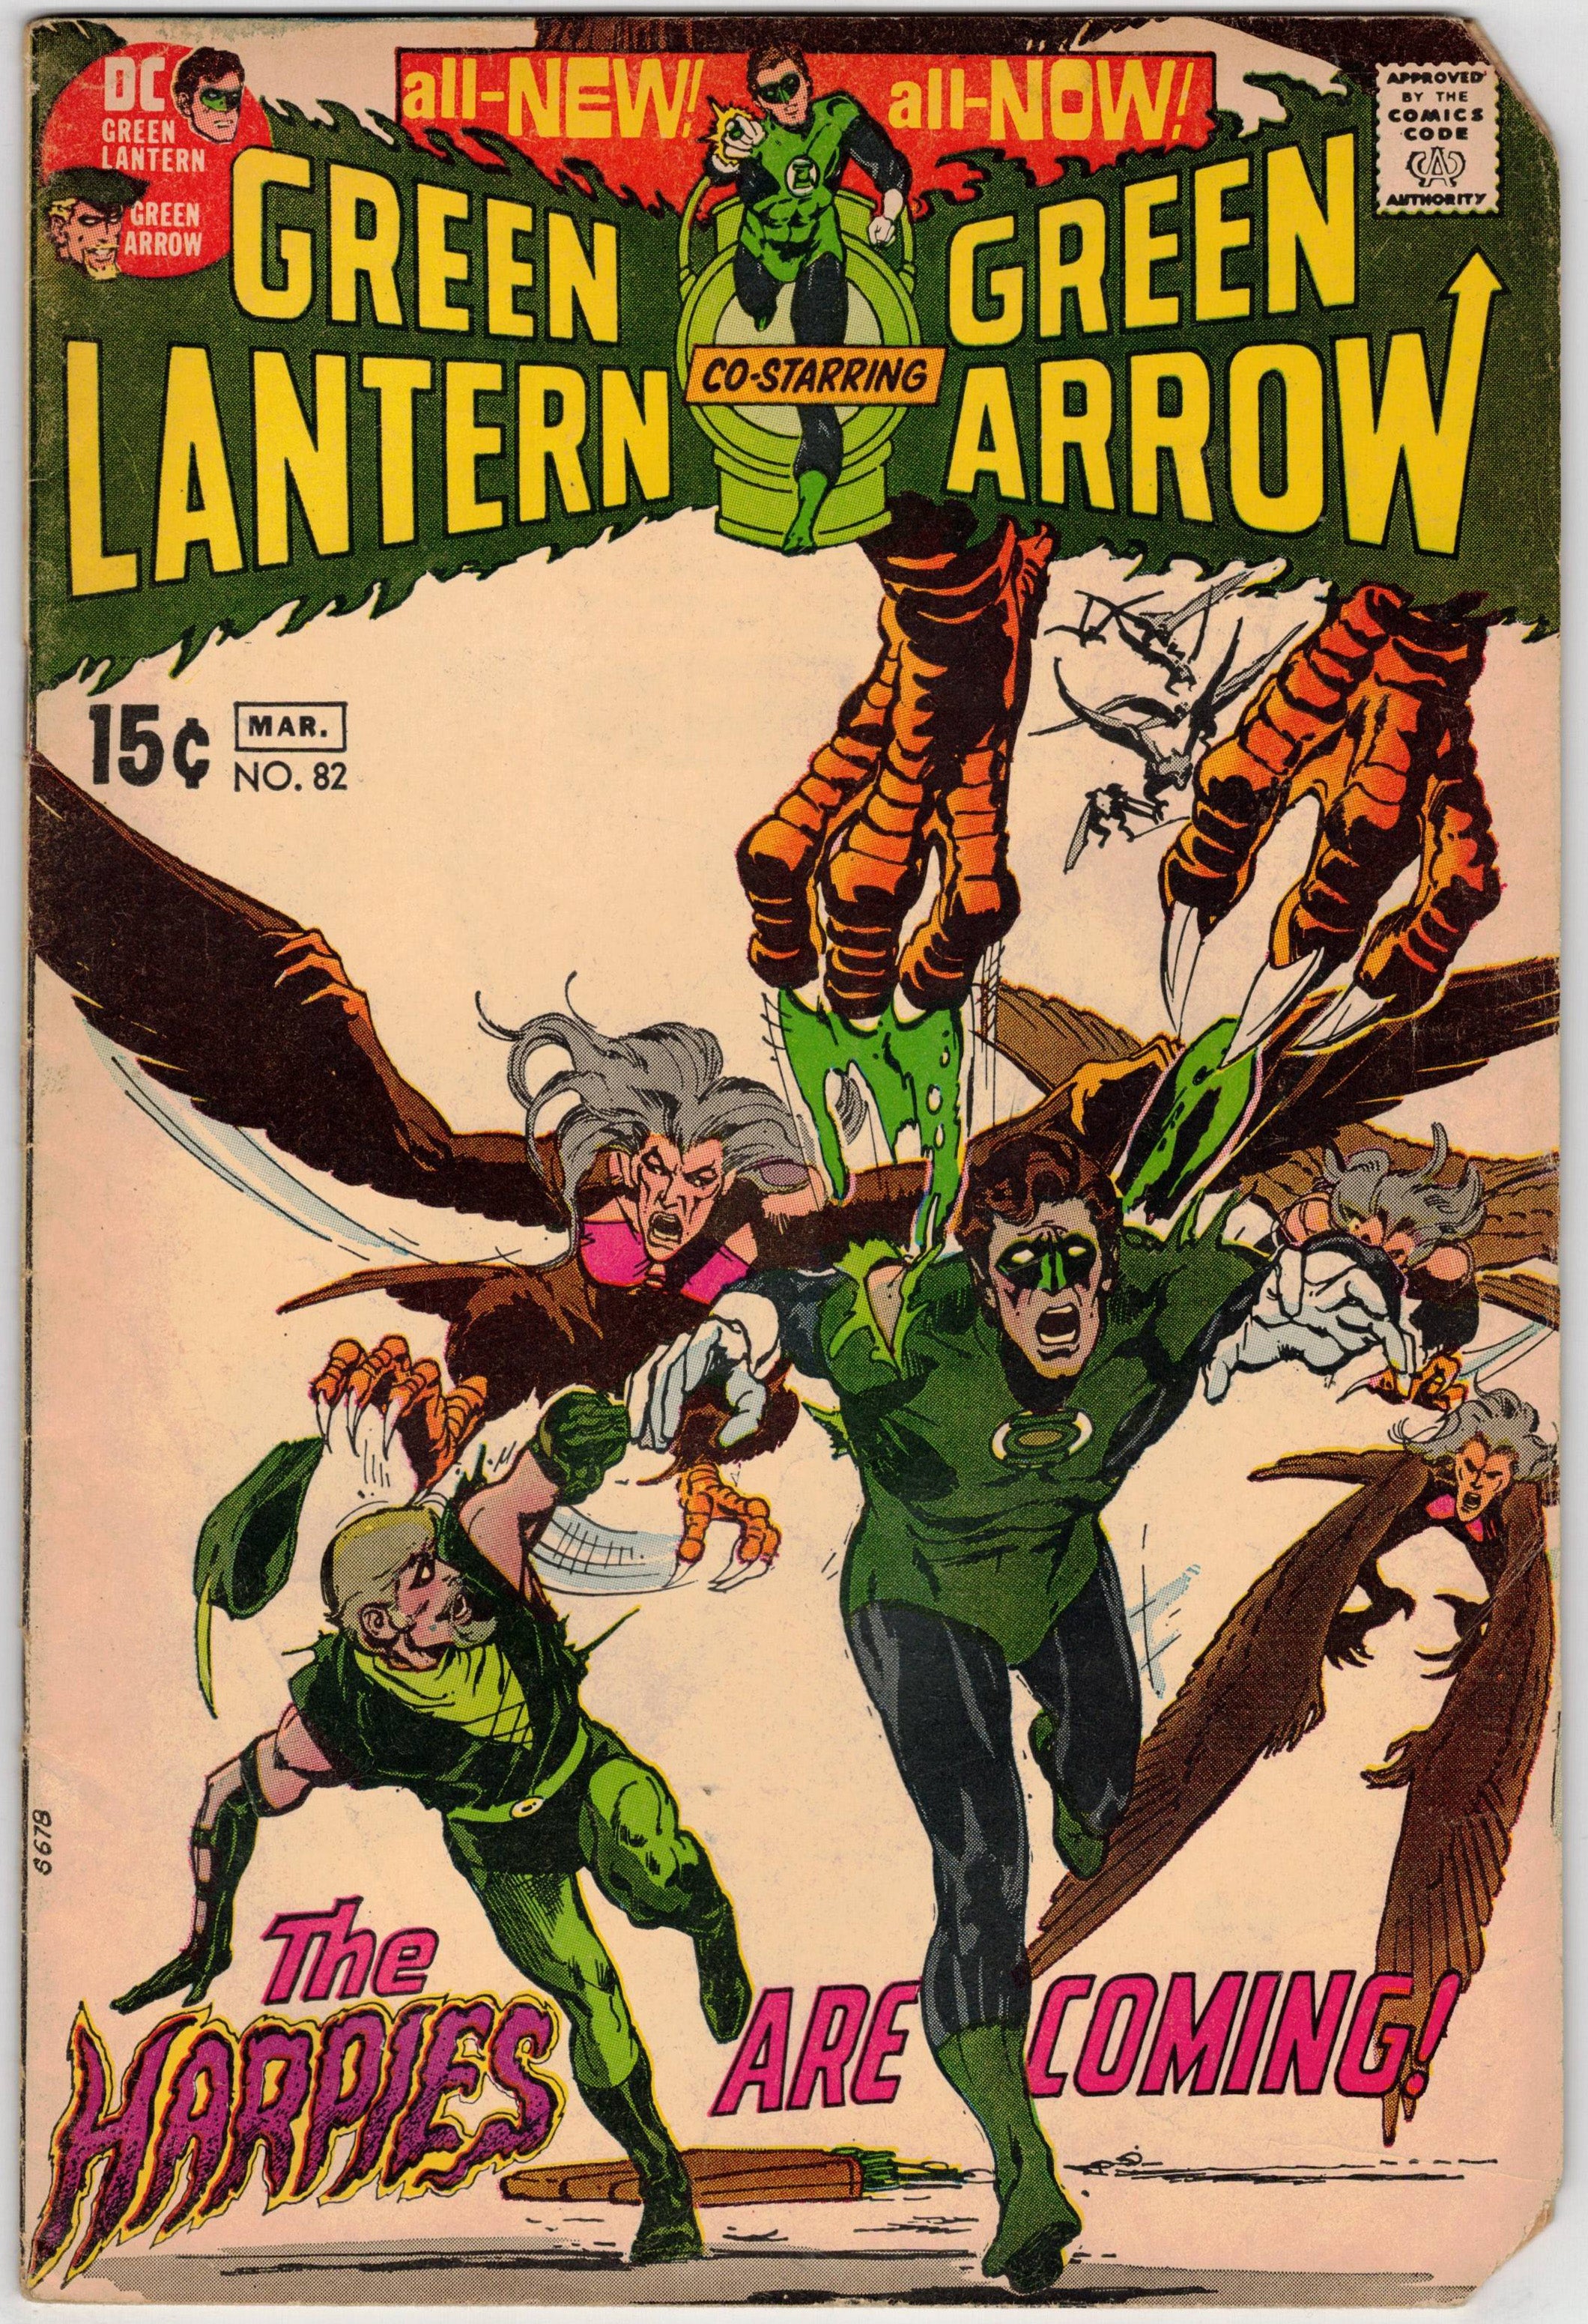 Photo of Green Lantern, Vol. 2 (1971) Issue 82 - Fair Comic sold by Stronghold Collectibles